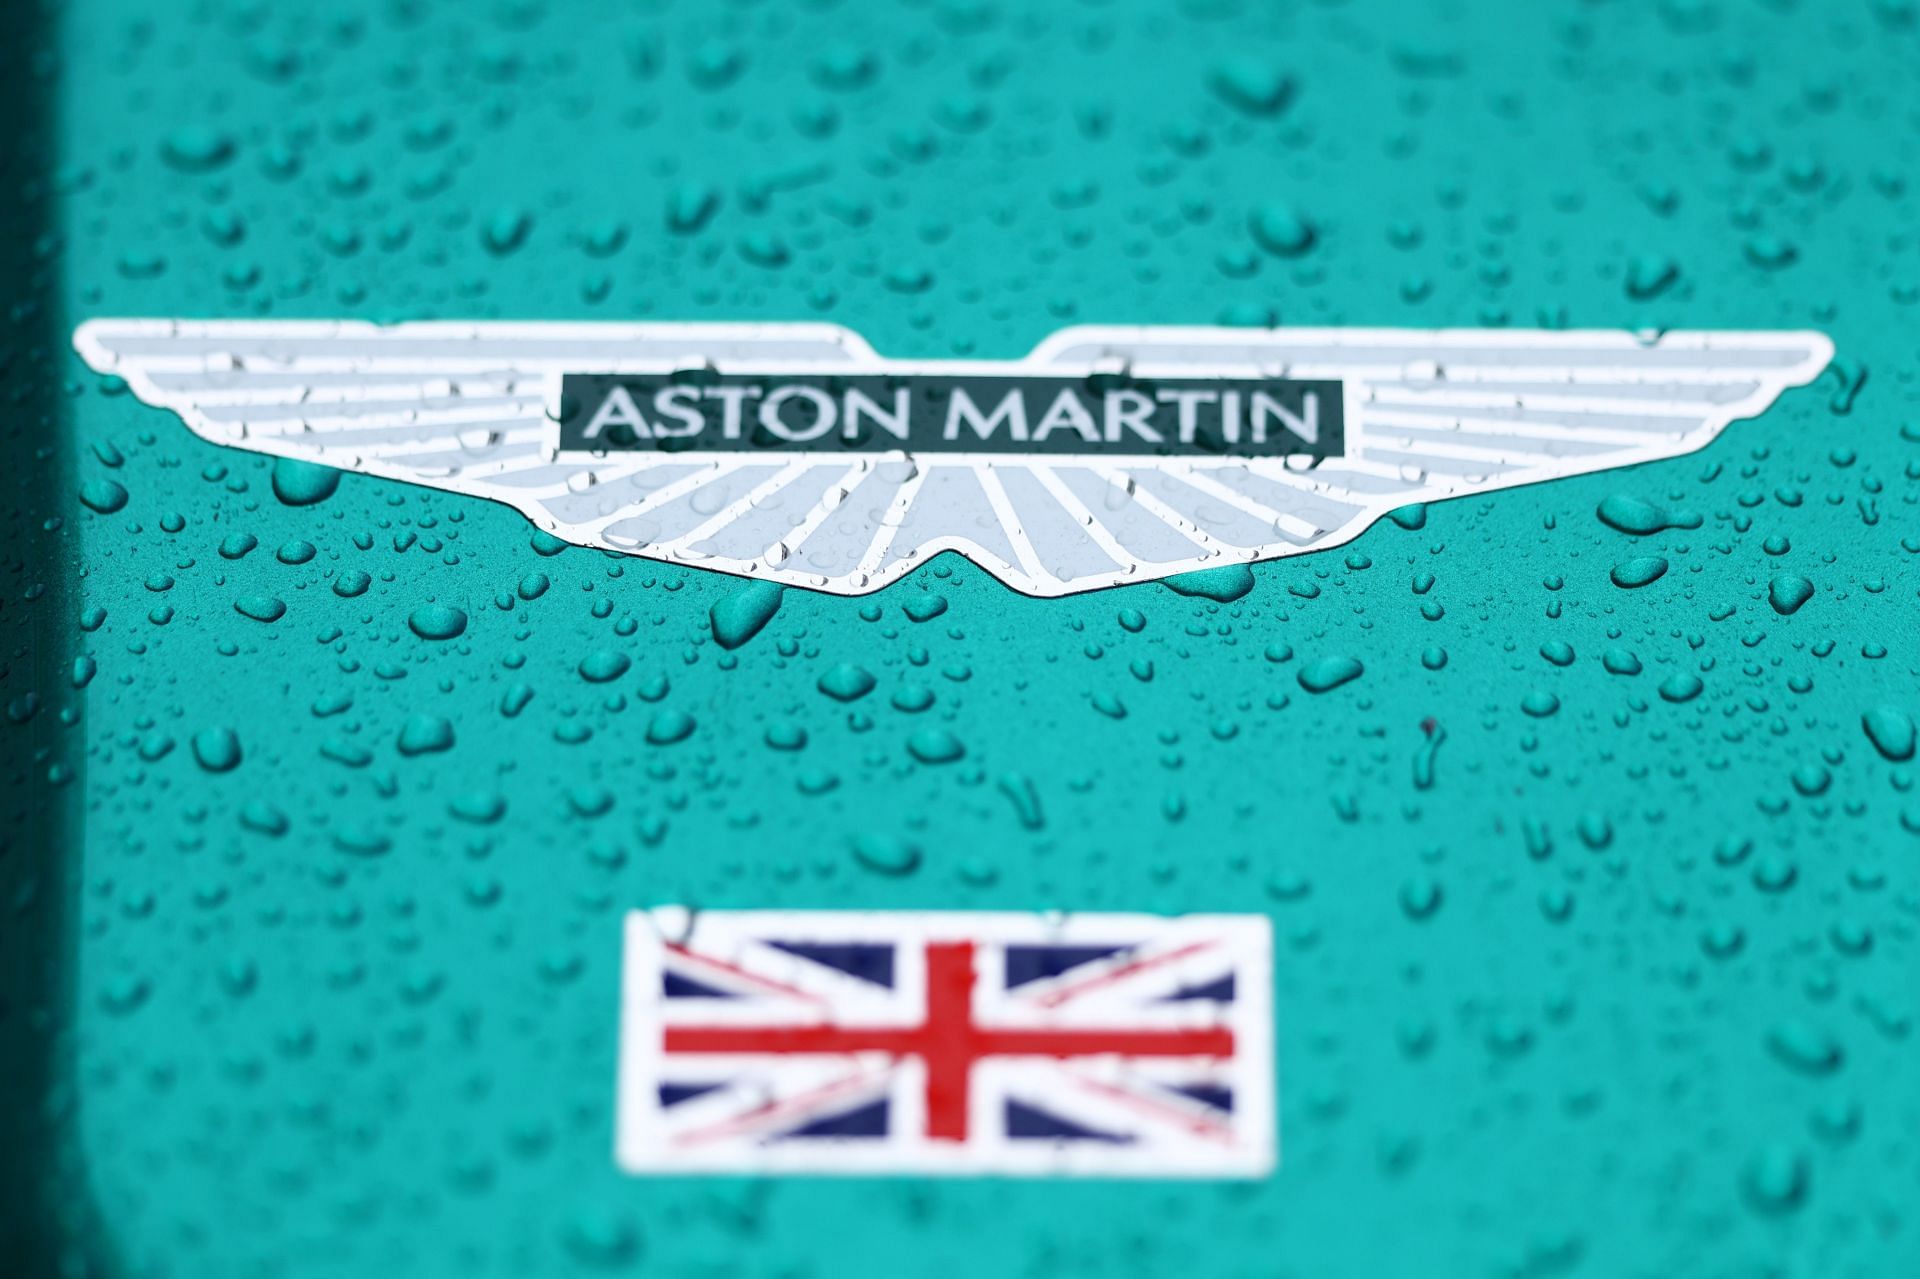 The Aston Martin F1 logo photographed during the 2022 F1 Canadian GP weekend (Photo by Clive Rose/Getty Images)